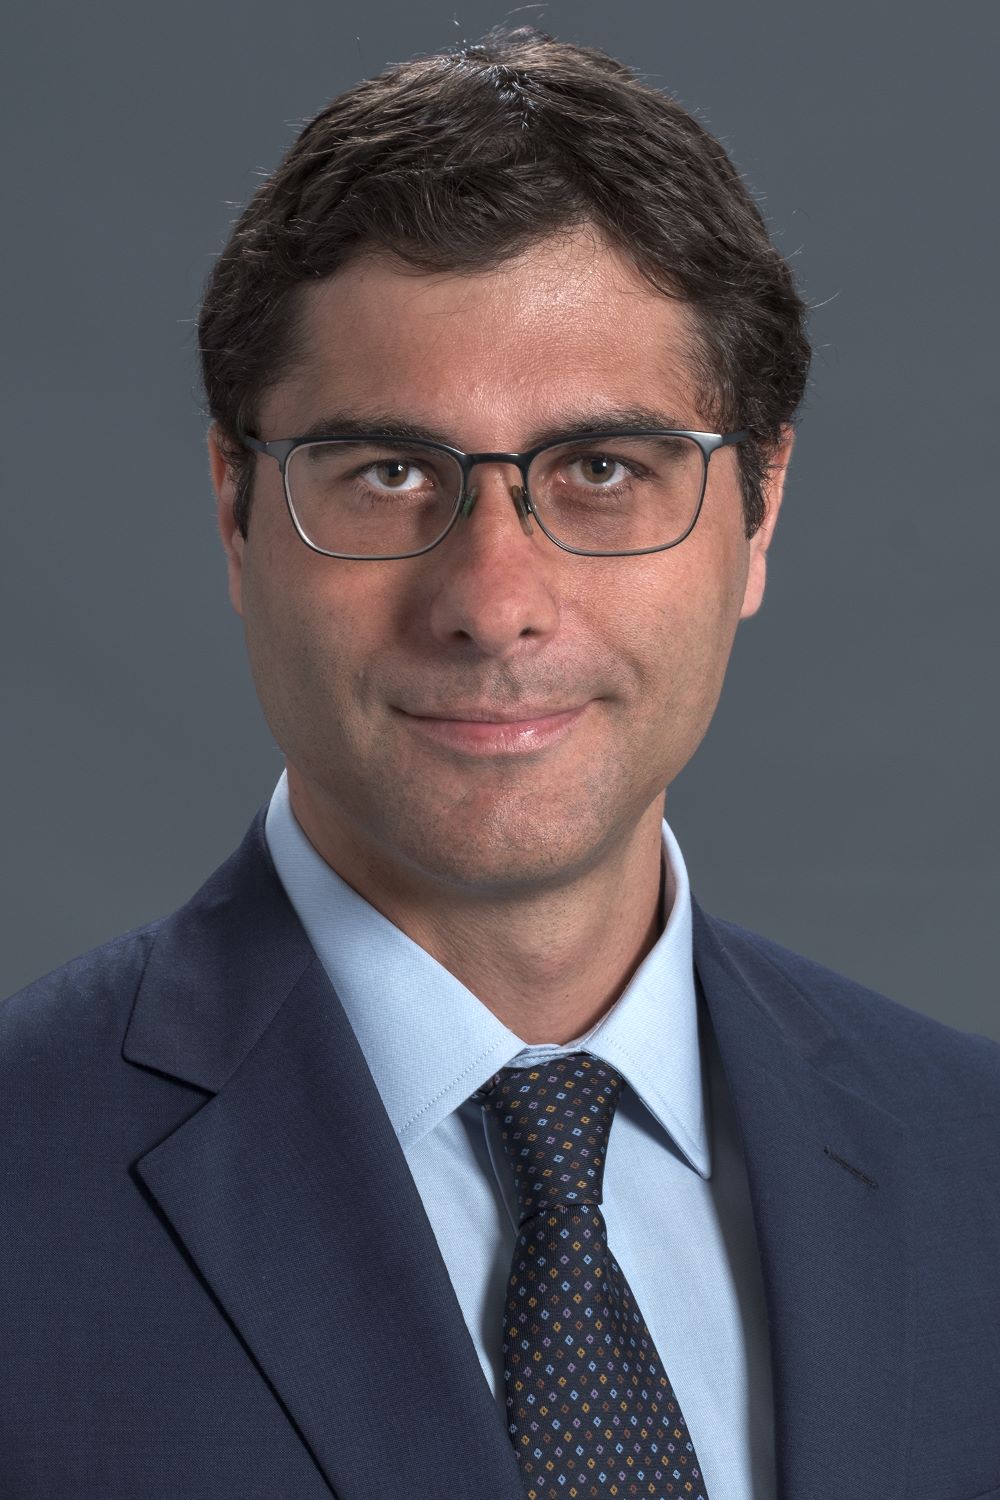 man with short dark hair and glasses wearing dark blue suit and tie with light blue shirt